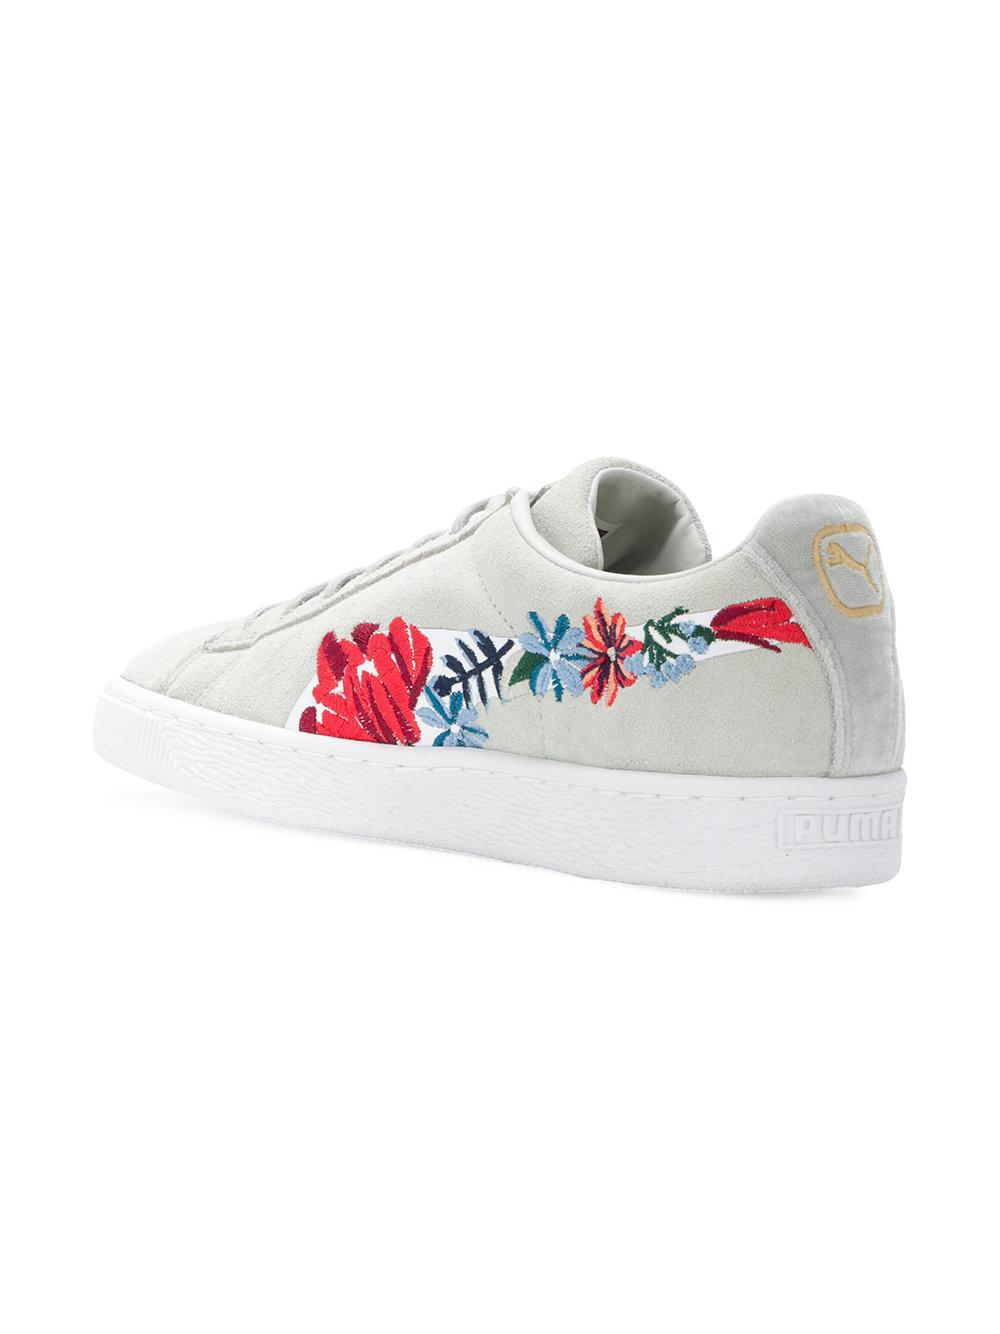 PUMA Suede Hyper Floral Embroidered Sneakers in Grey (Gray) | Lyst